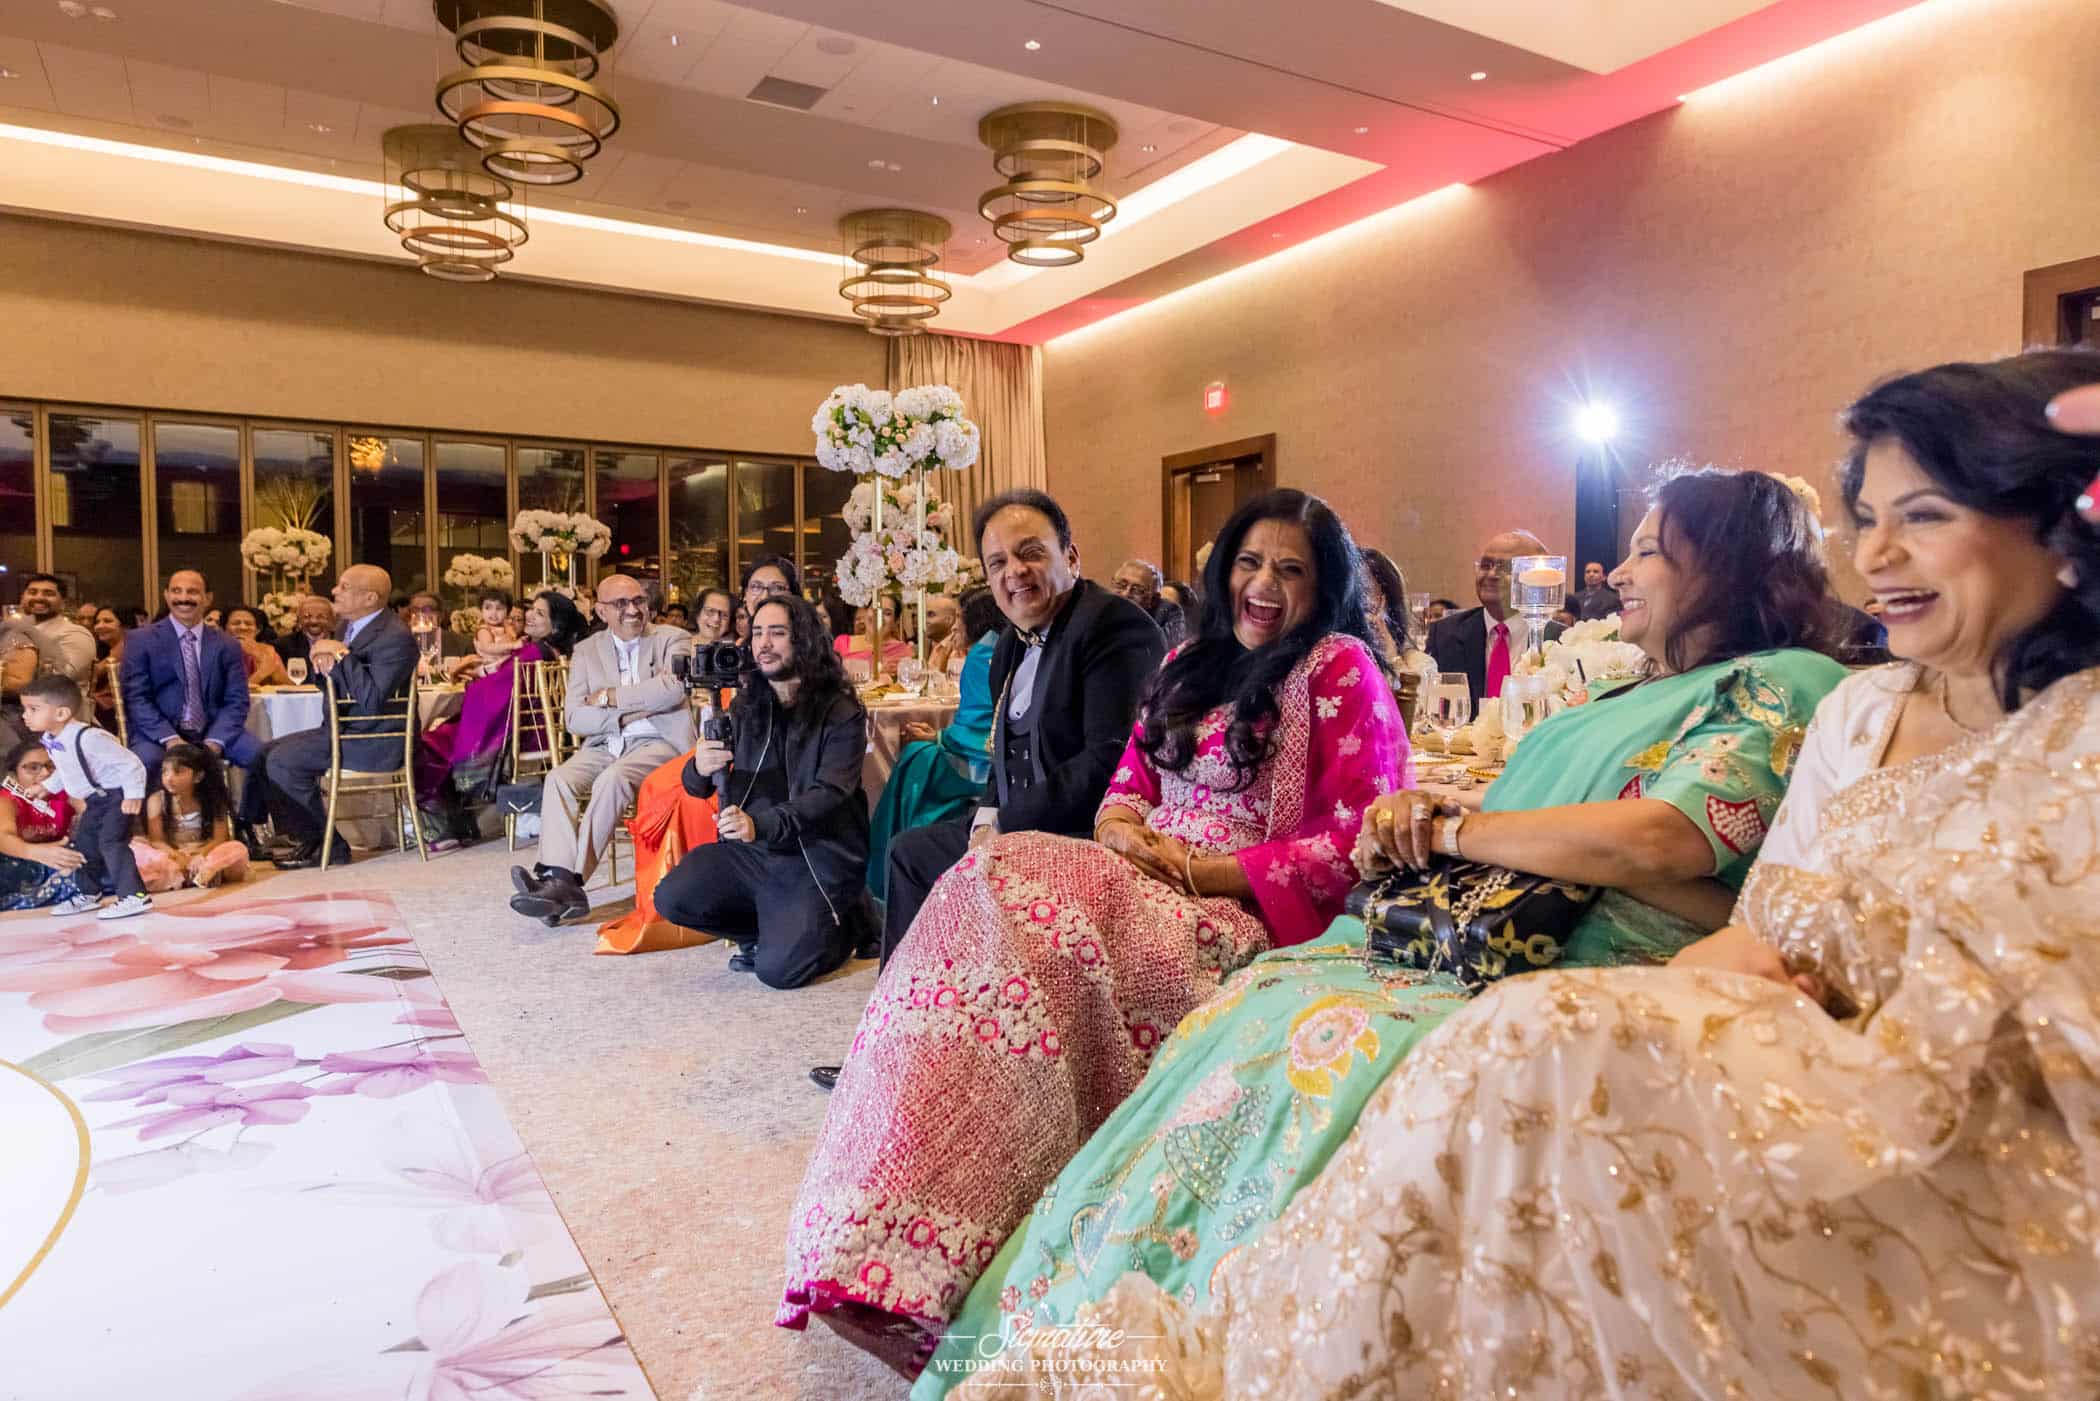 Wedding guests sitting during reception